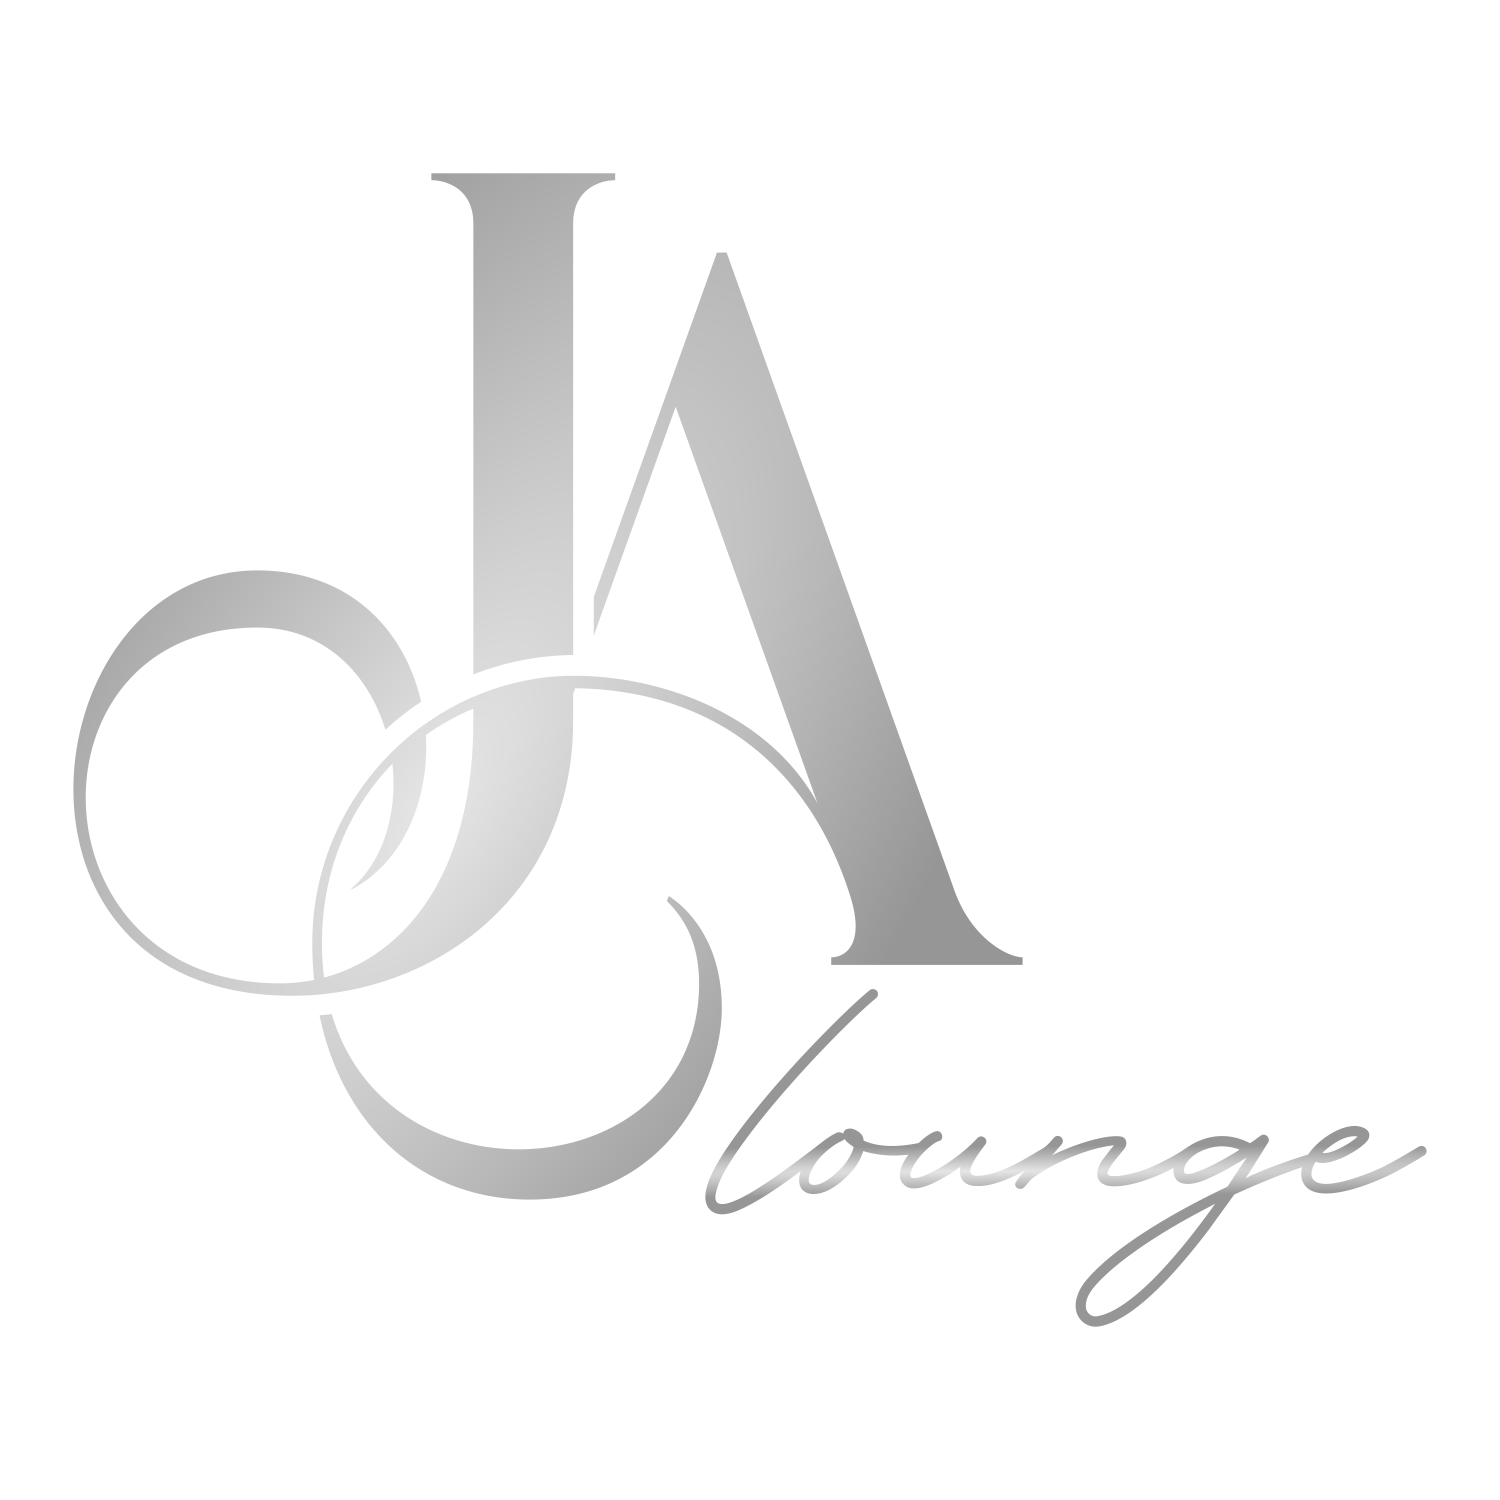 Welcome to J&amp;A Lounge where quality &amp; consistency matter!